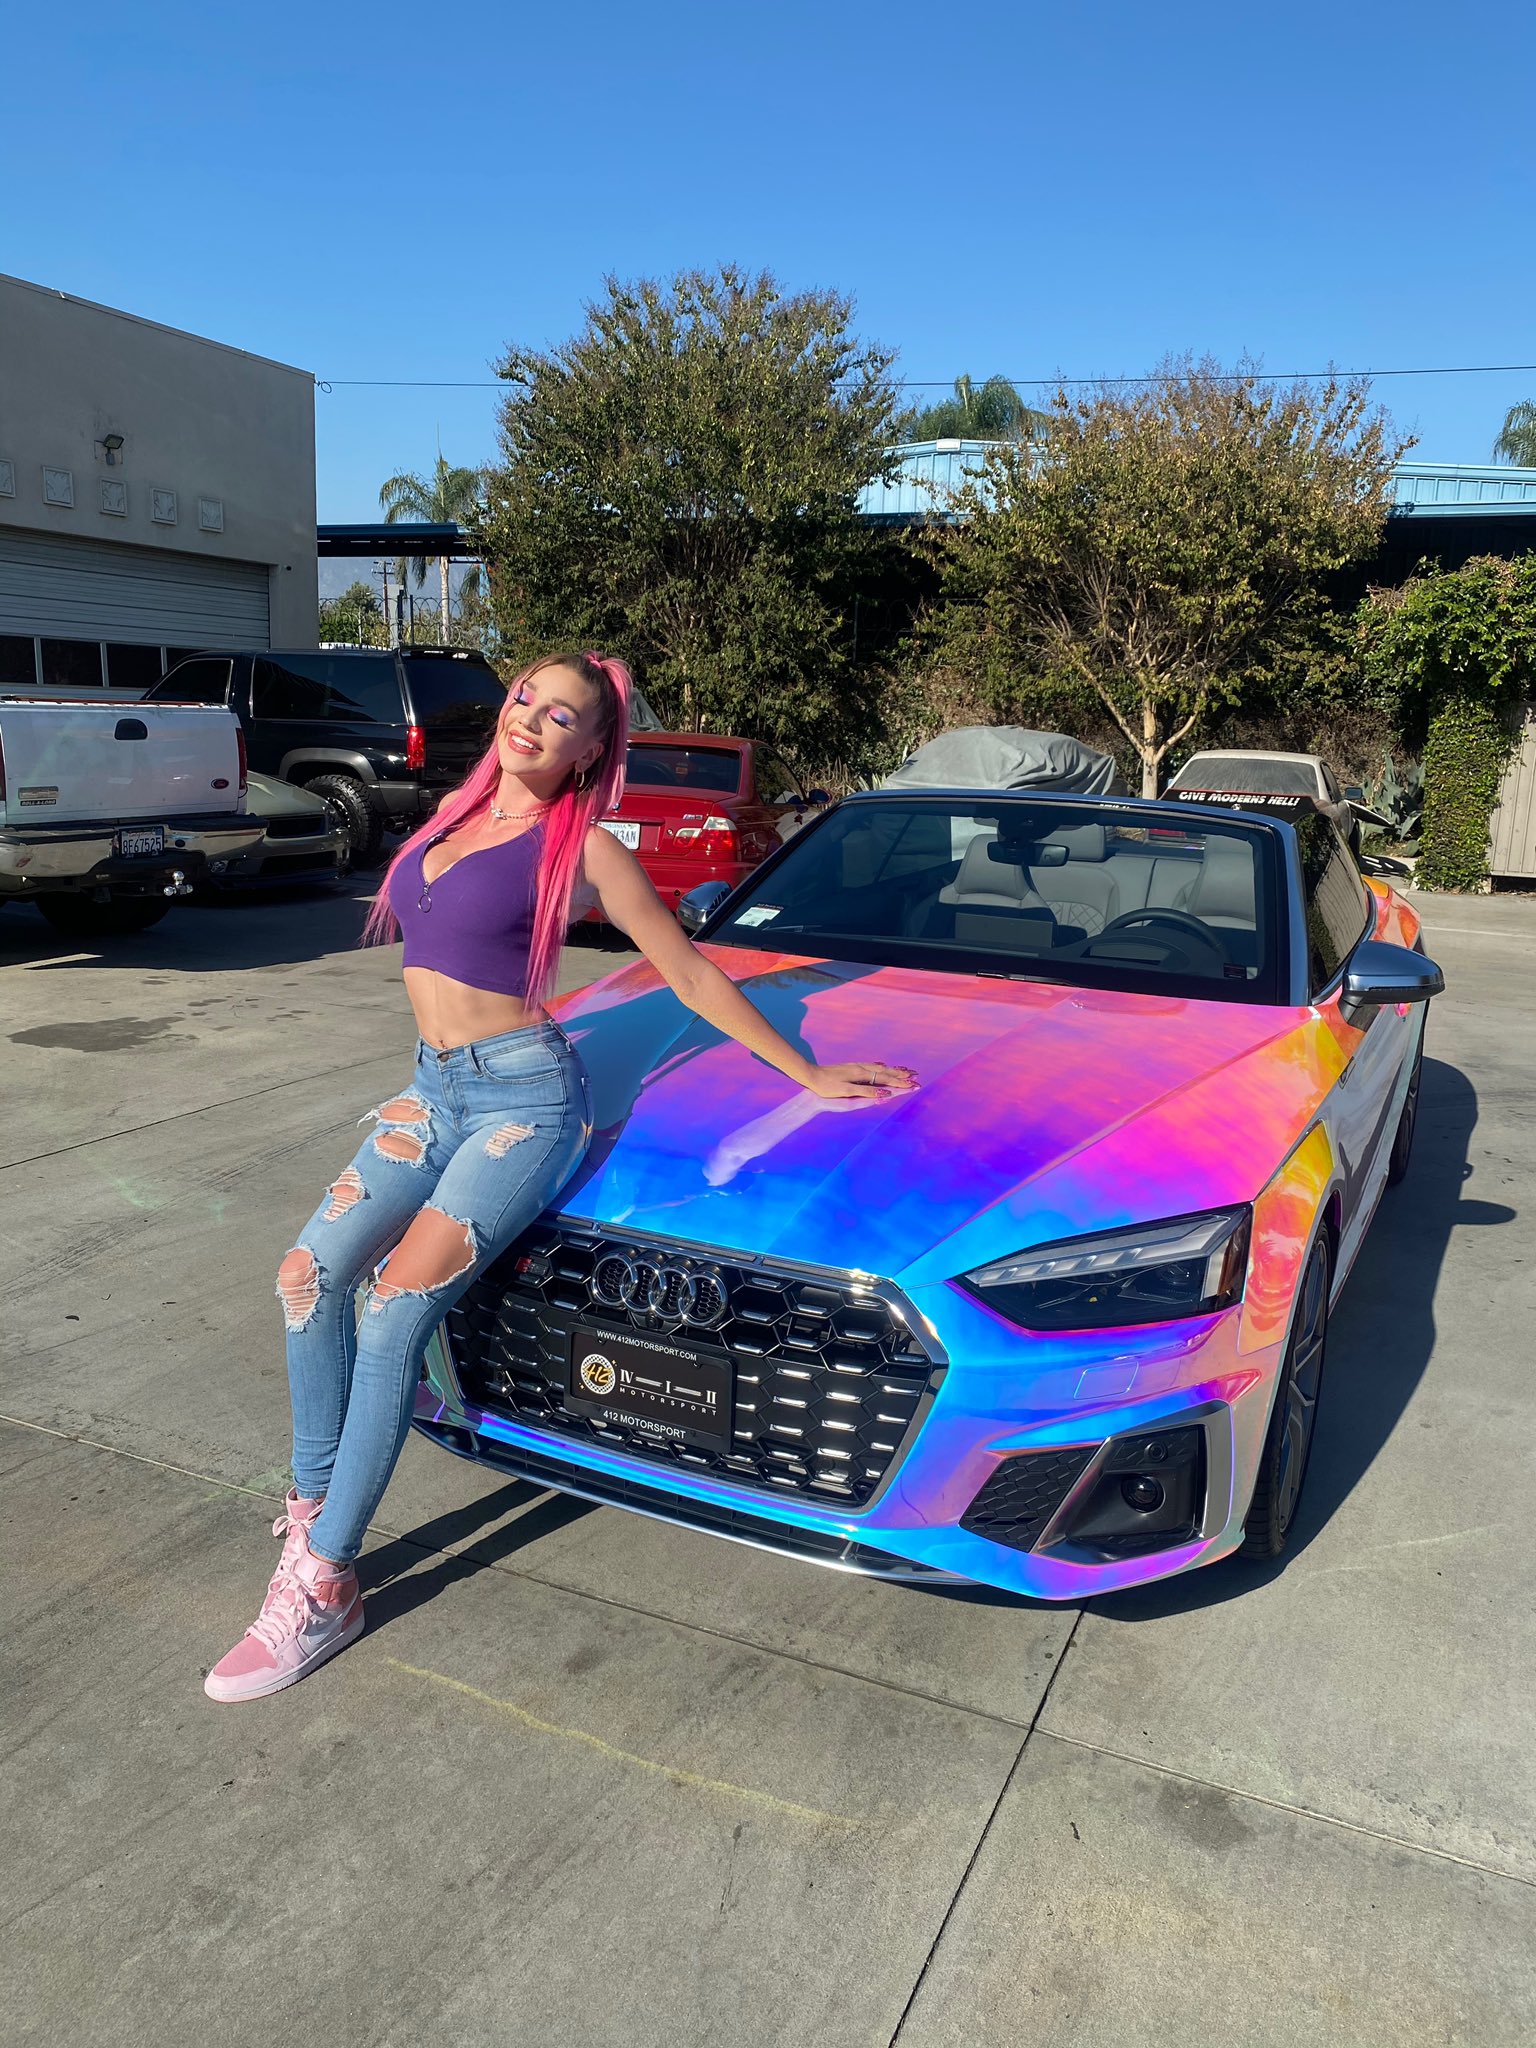 Just picked up my unicorn car 😍🦄💖 https://t.co/QILHDlLyYJ